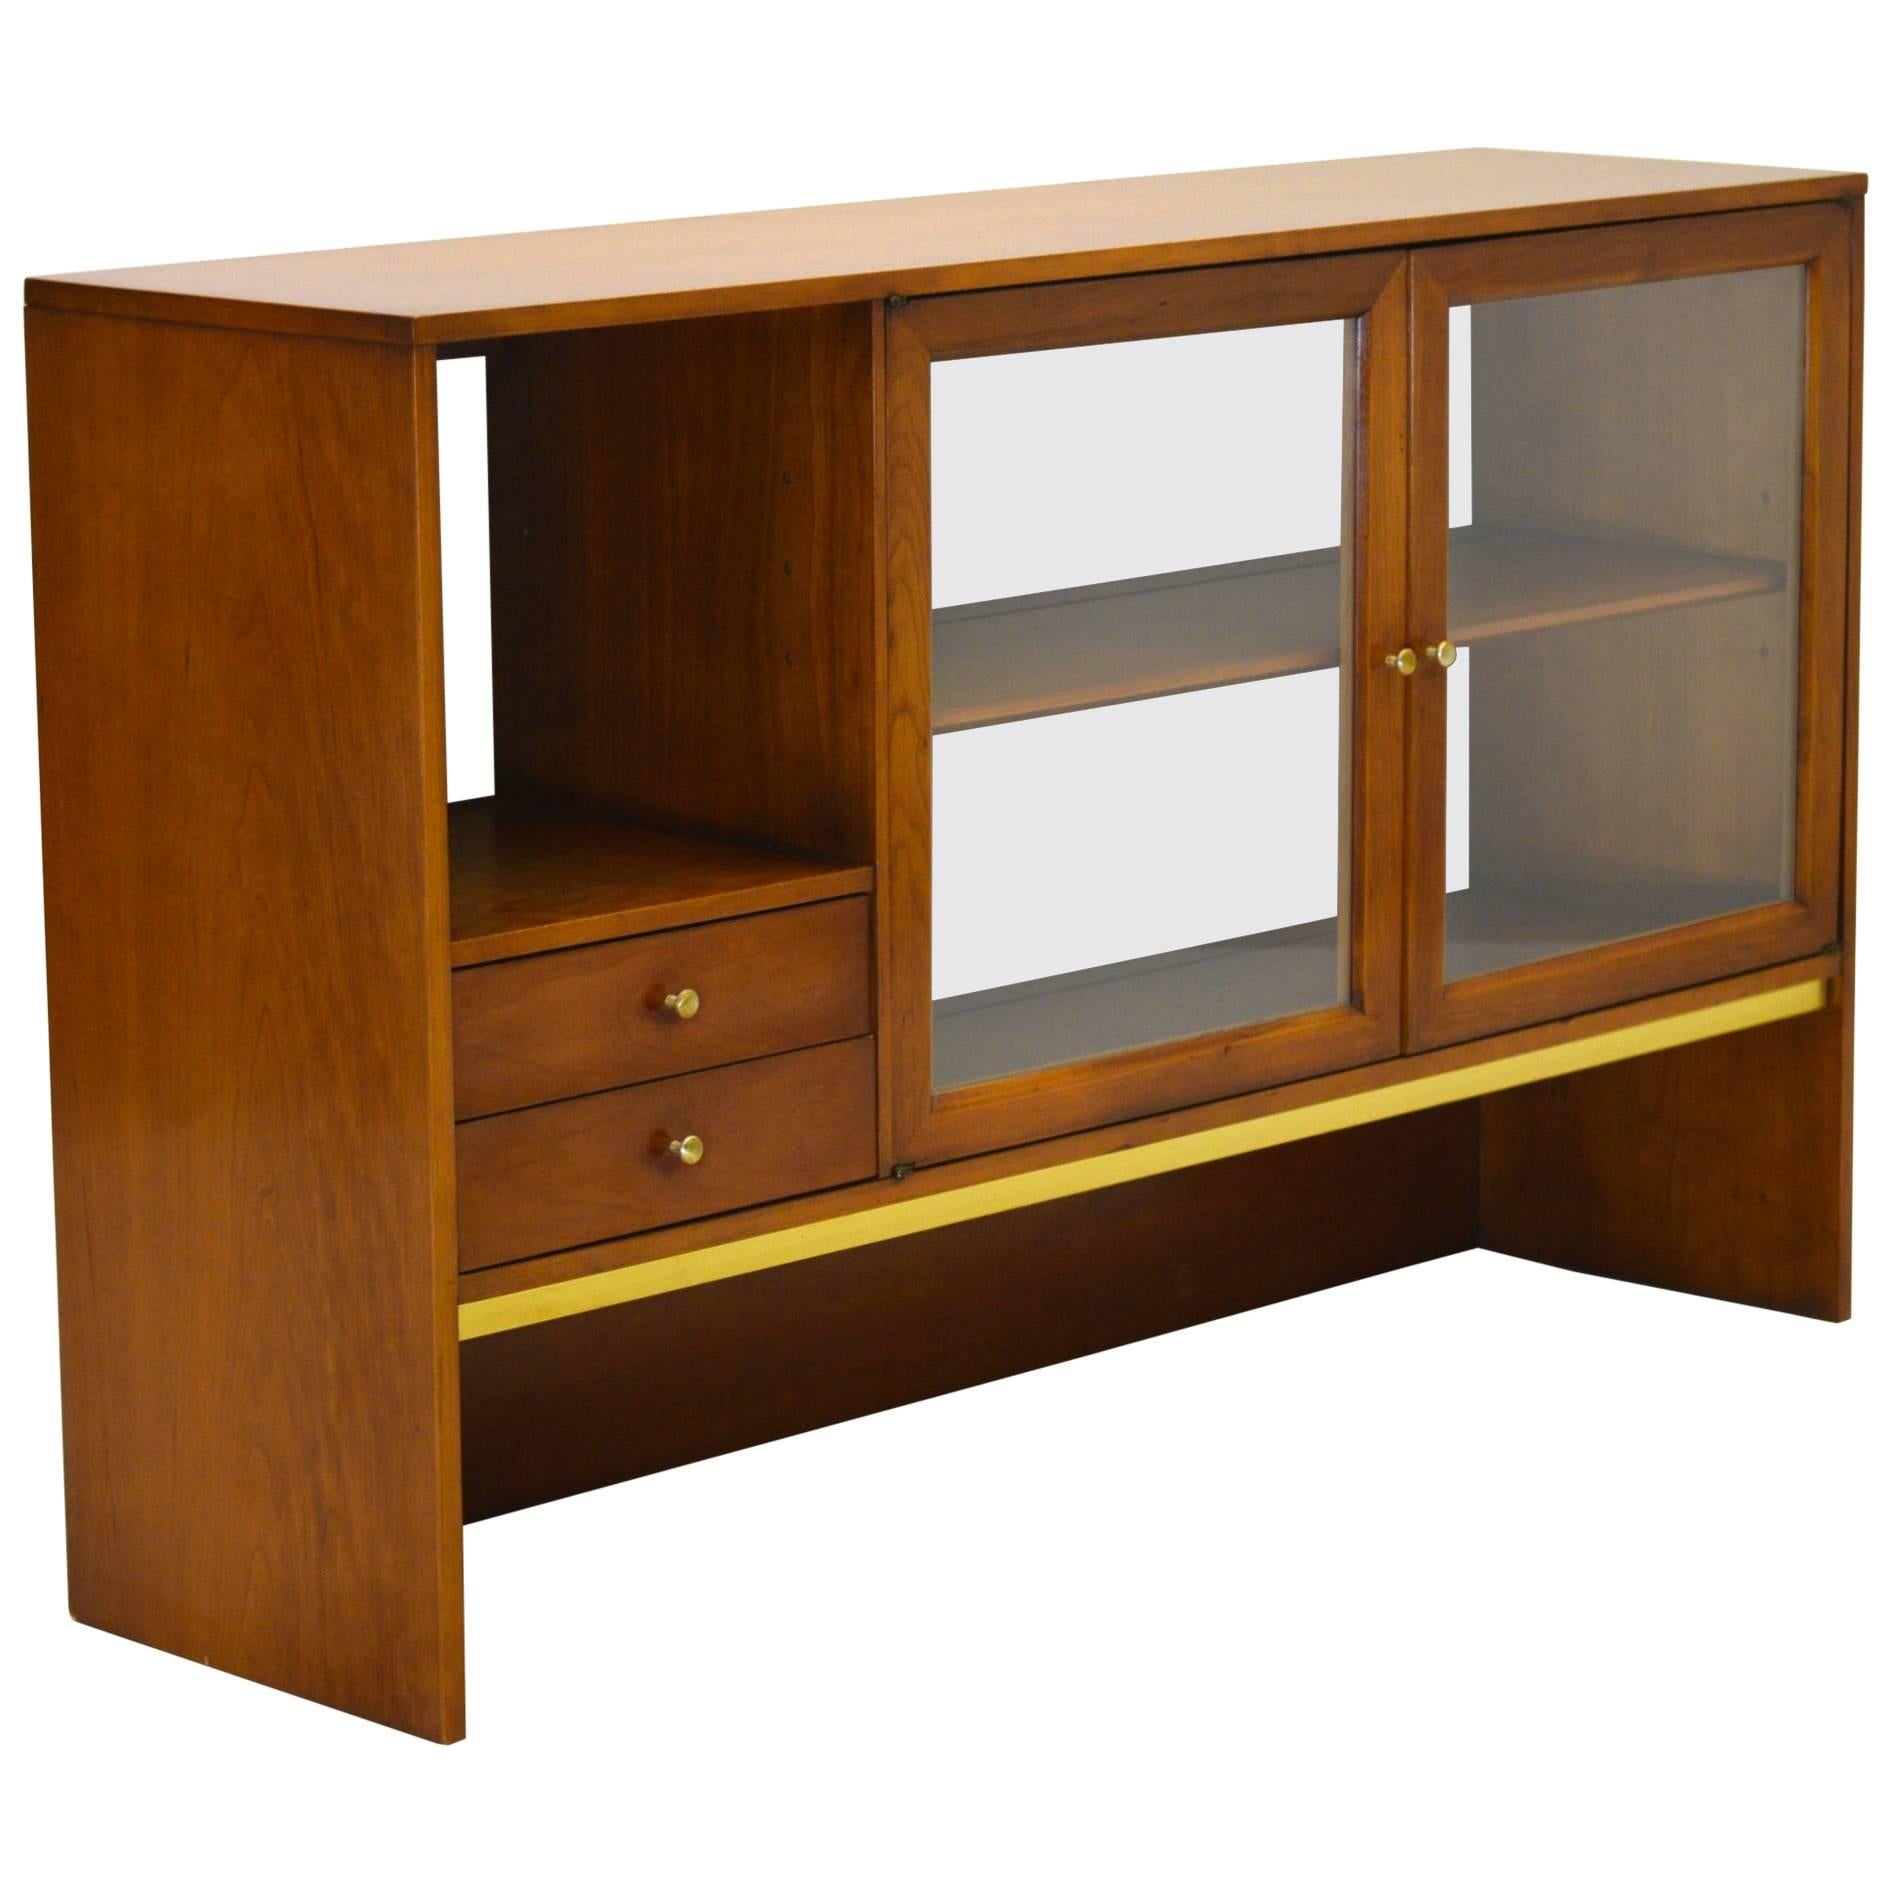 China Cabinet or Hutch by Kipp Stewart for Drexel, 1959